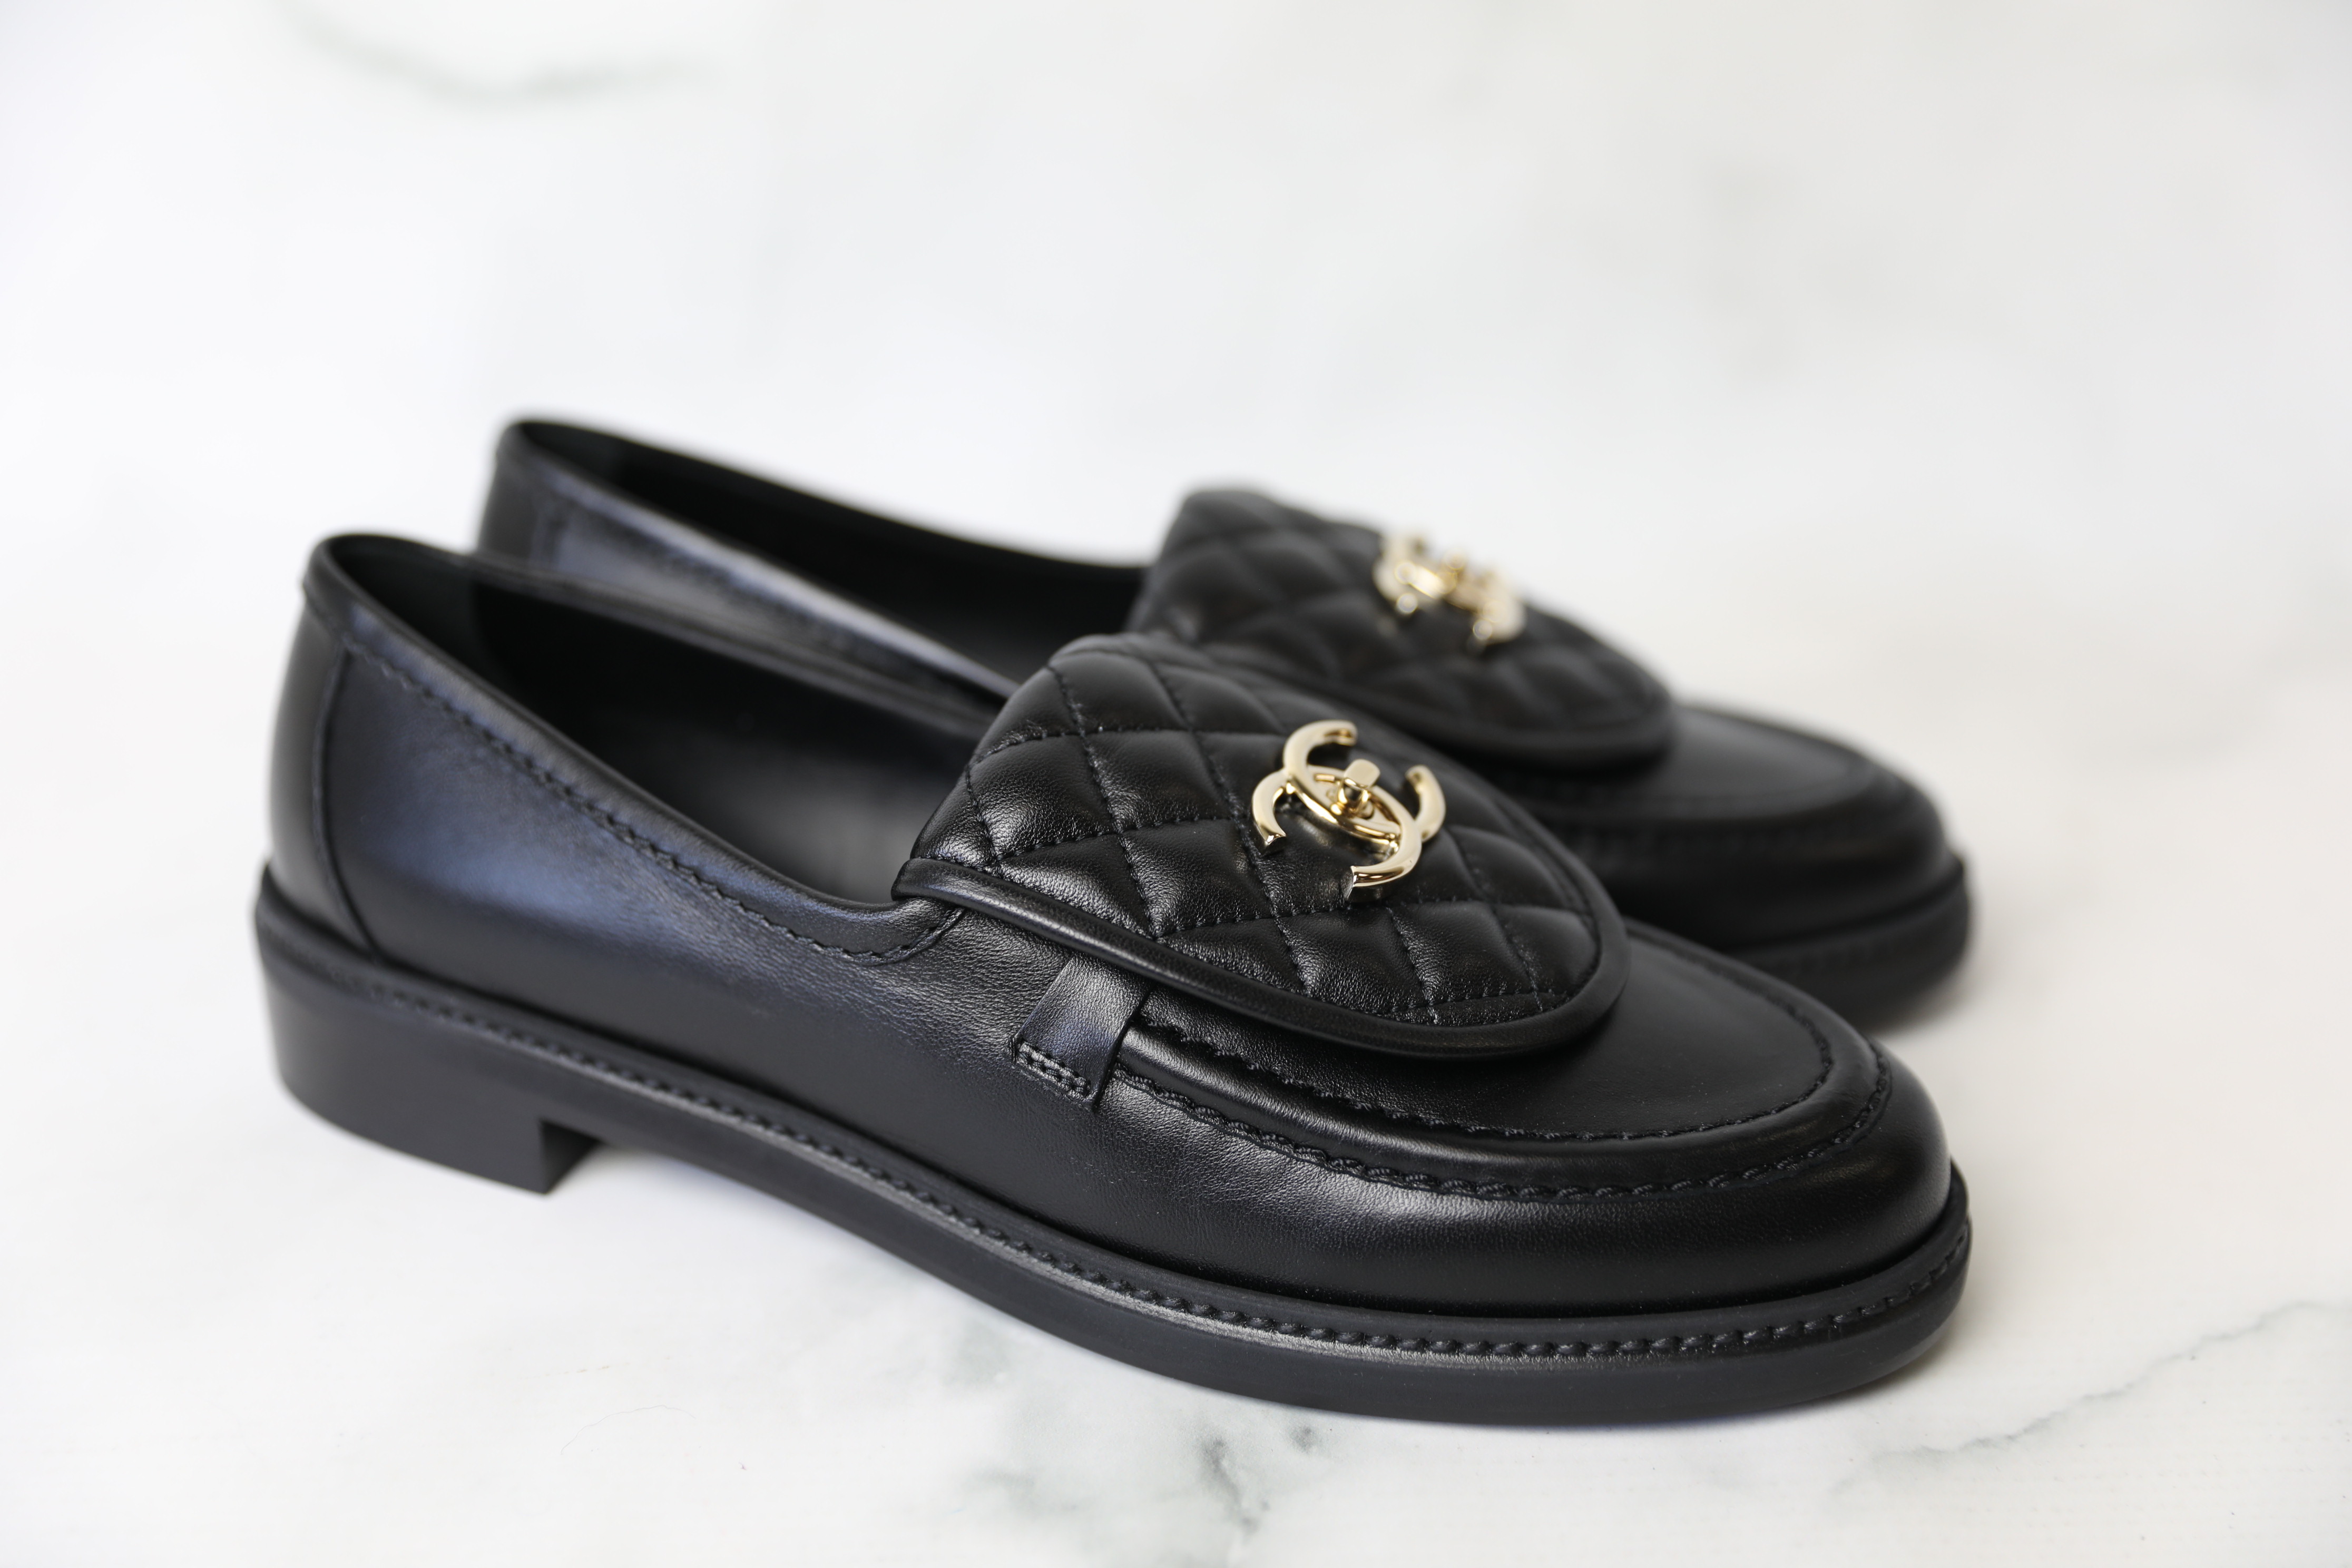 Chanel Turnlock Loafer, Black with Gold Hardware, Size, 42, New in Box WA001